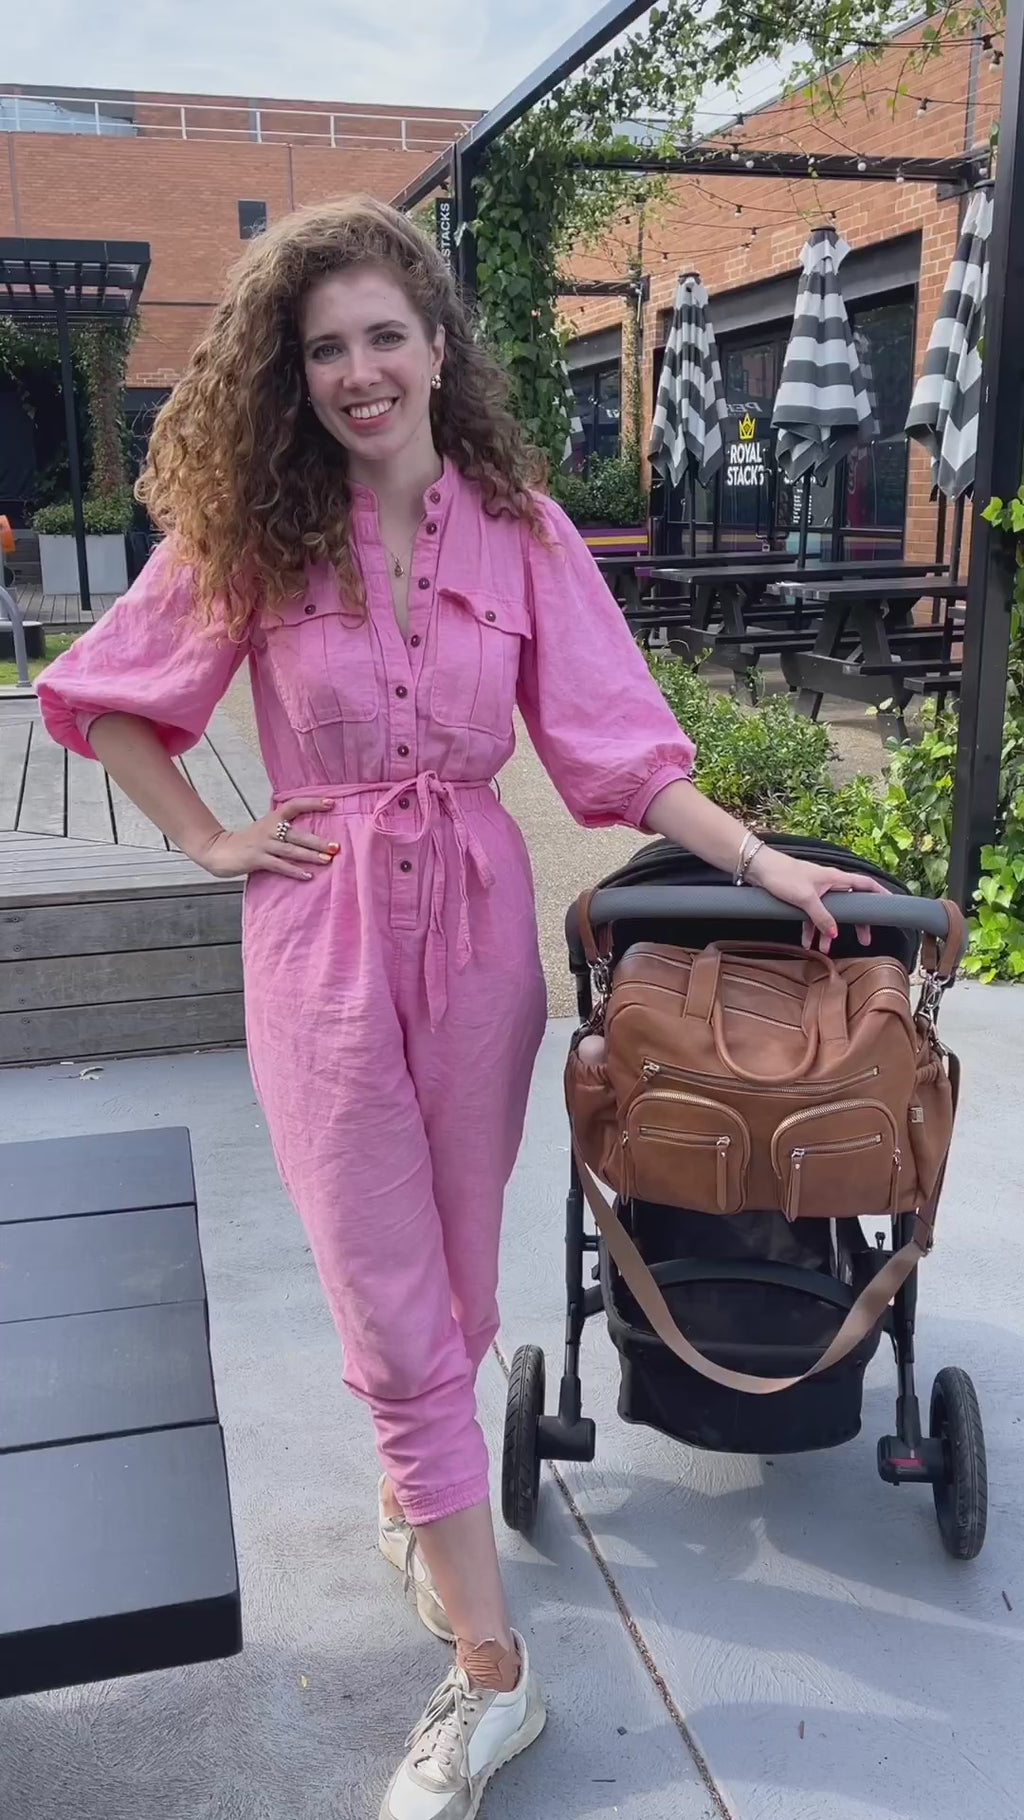 A mum demonstrates the OiOi carry all nappy bag